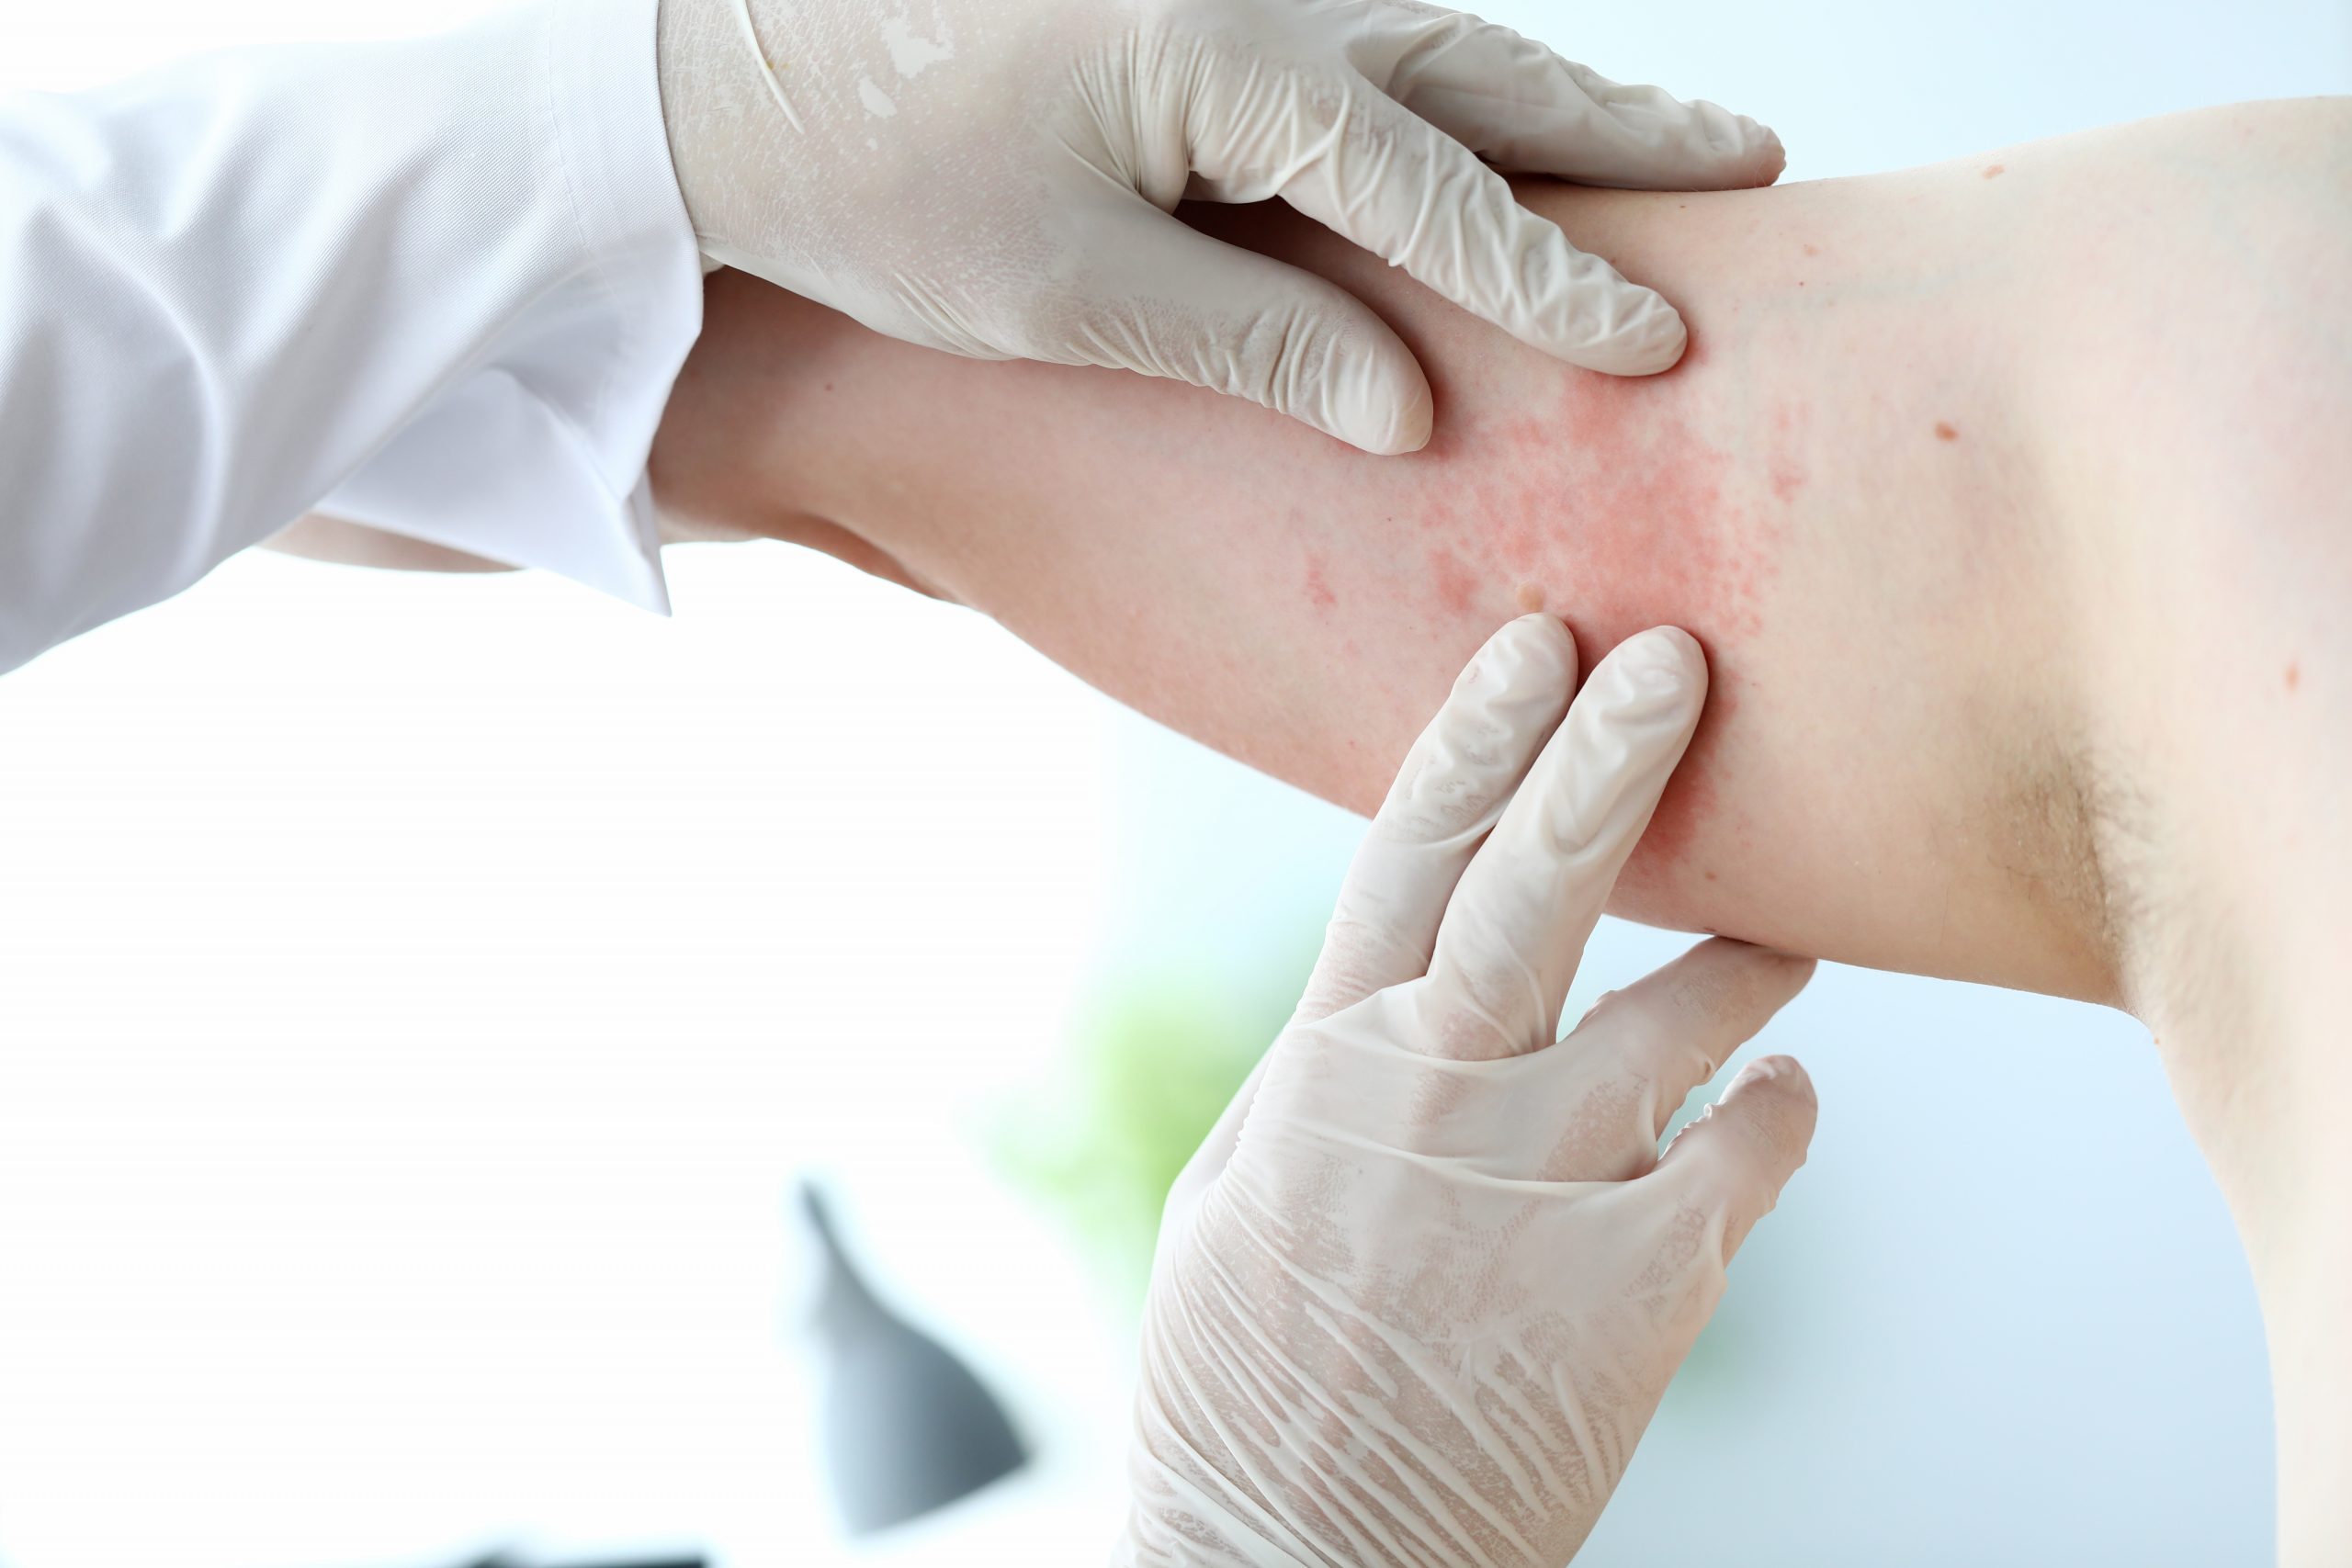 Treatment for skin cancer conducted by a doctor